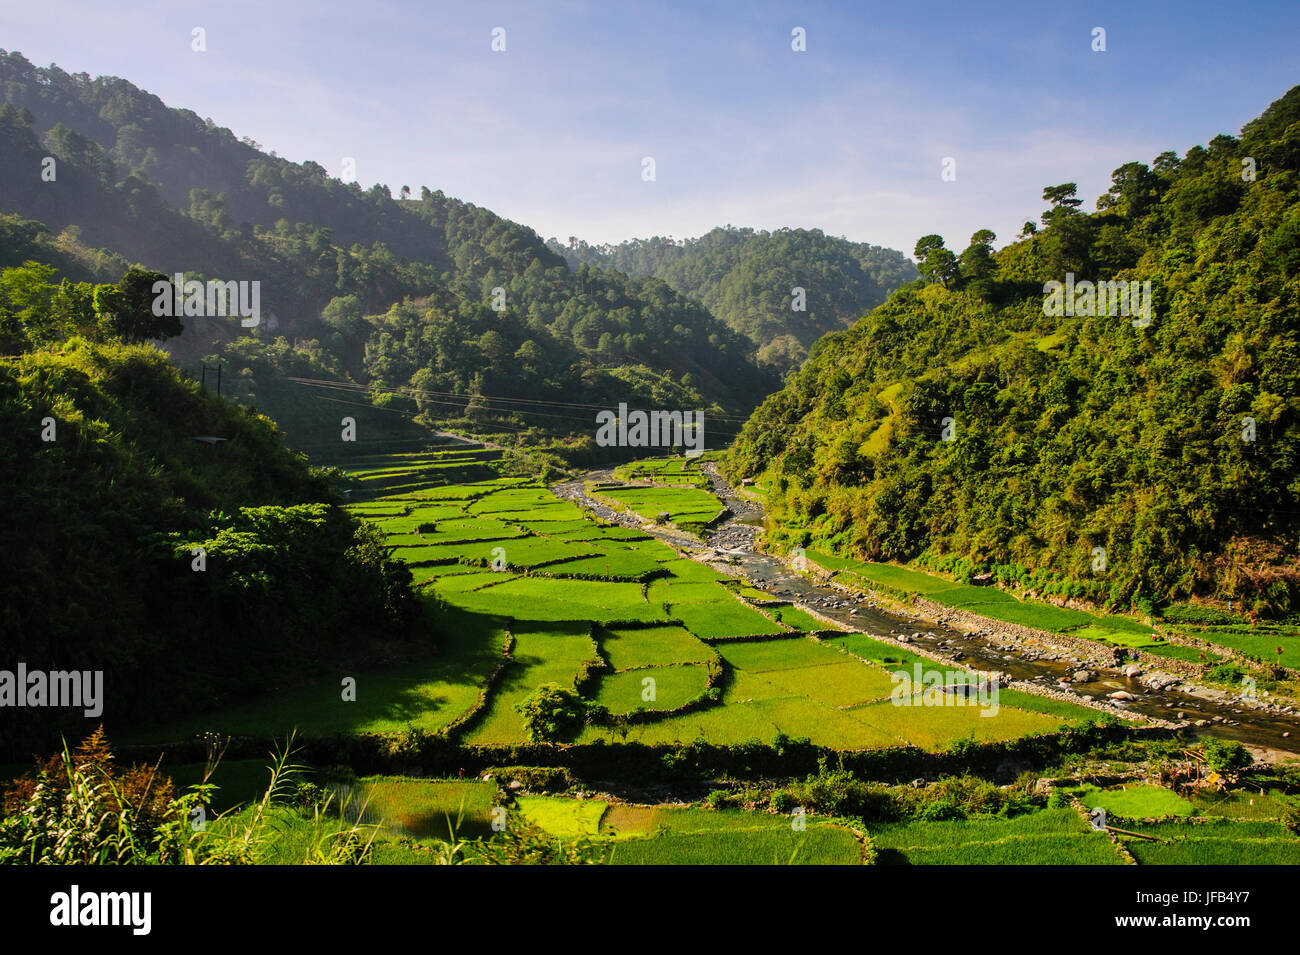 Along the rice terraces from Bontoc to Banaue, Luzon, Philippines Stock Photo